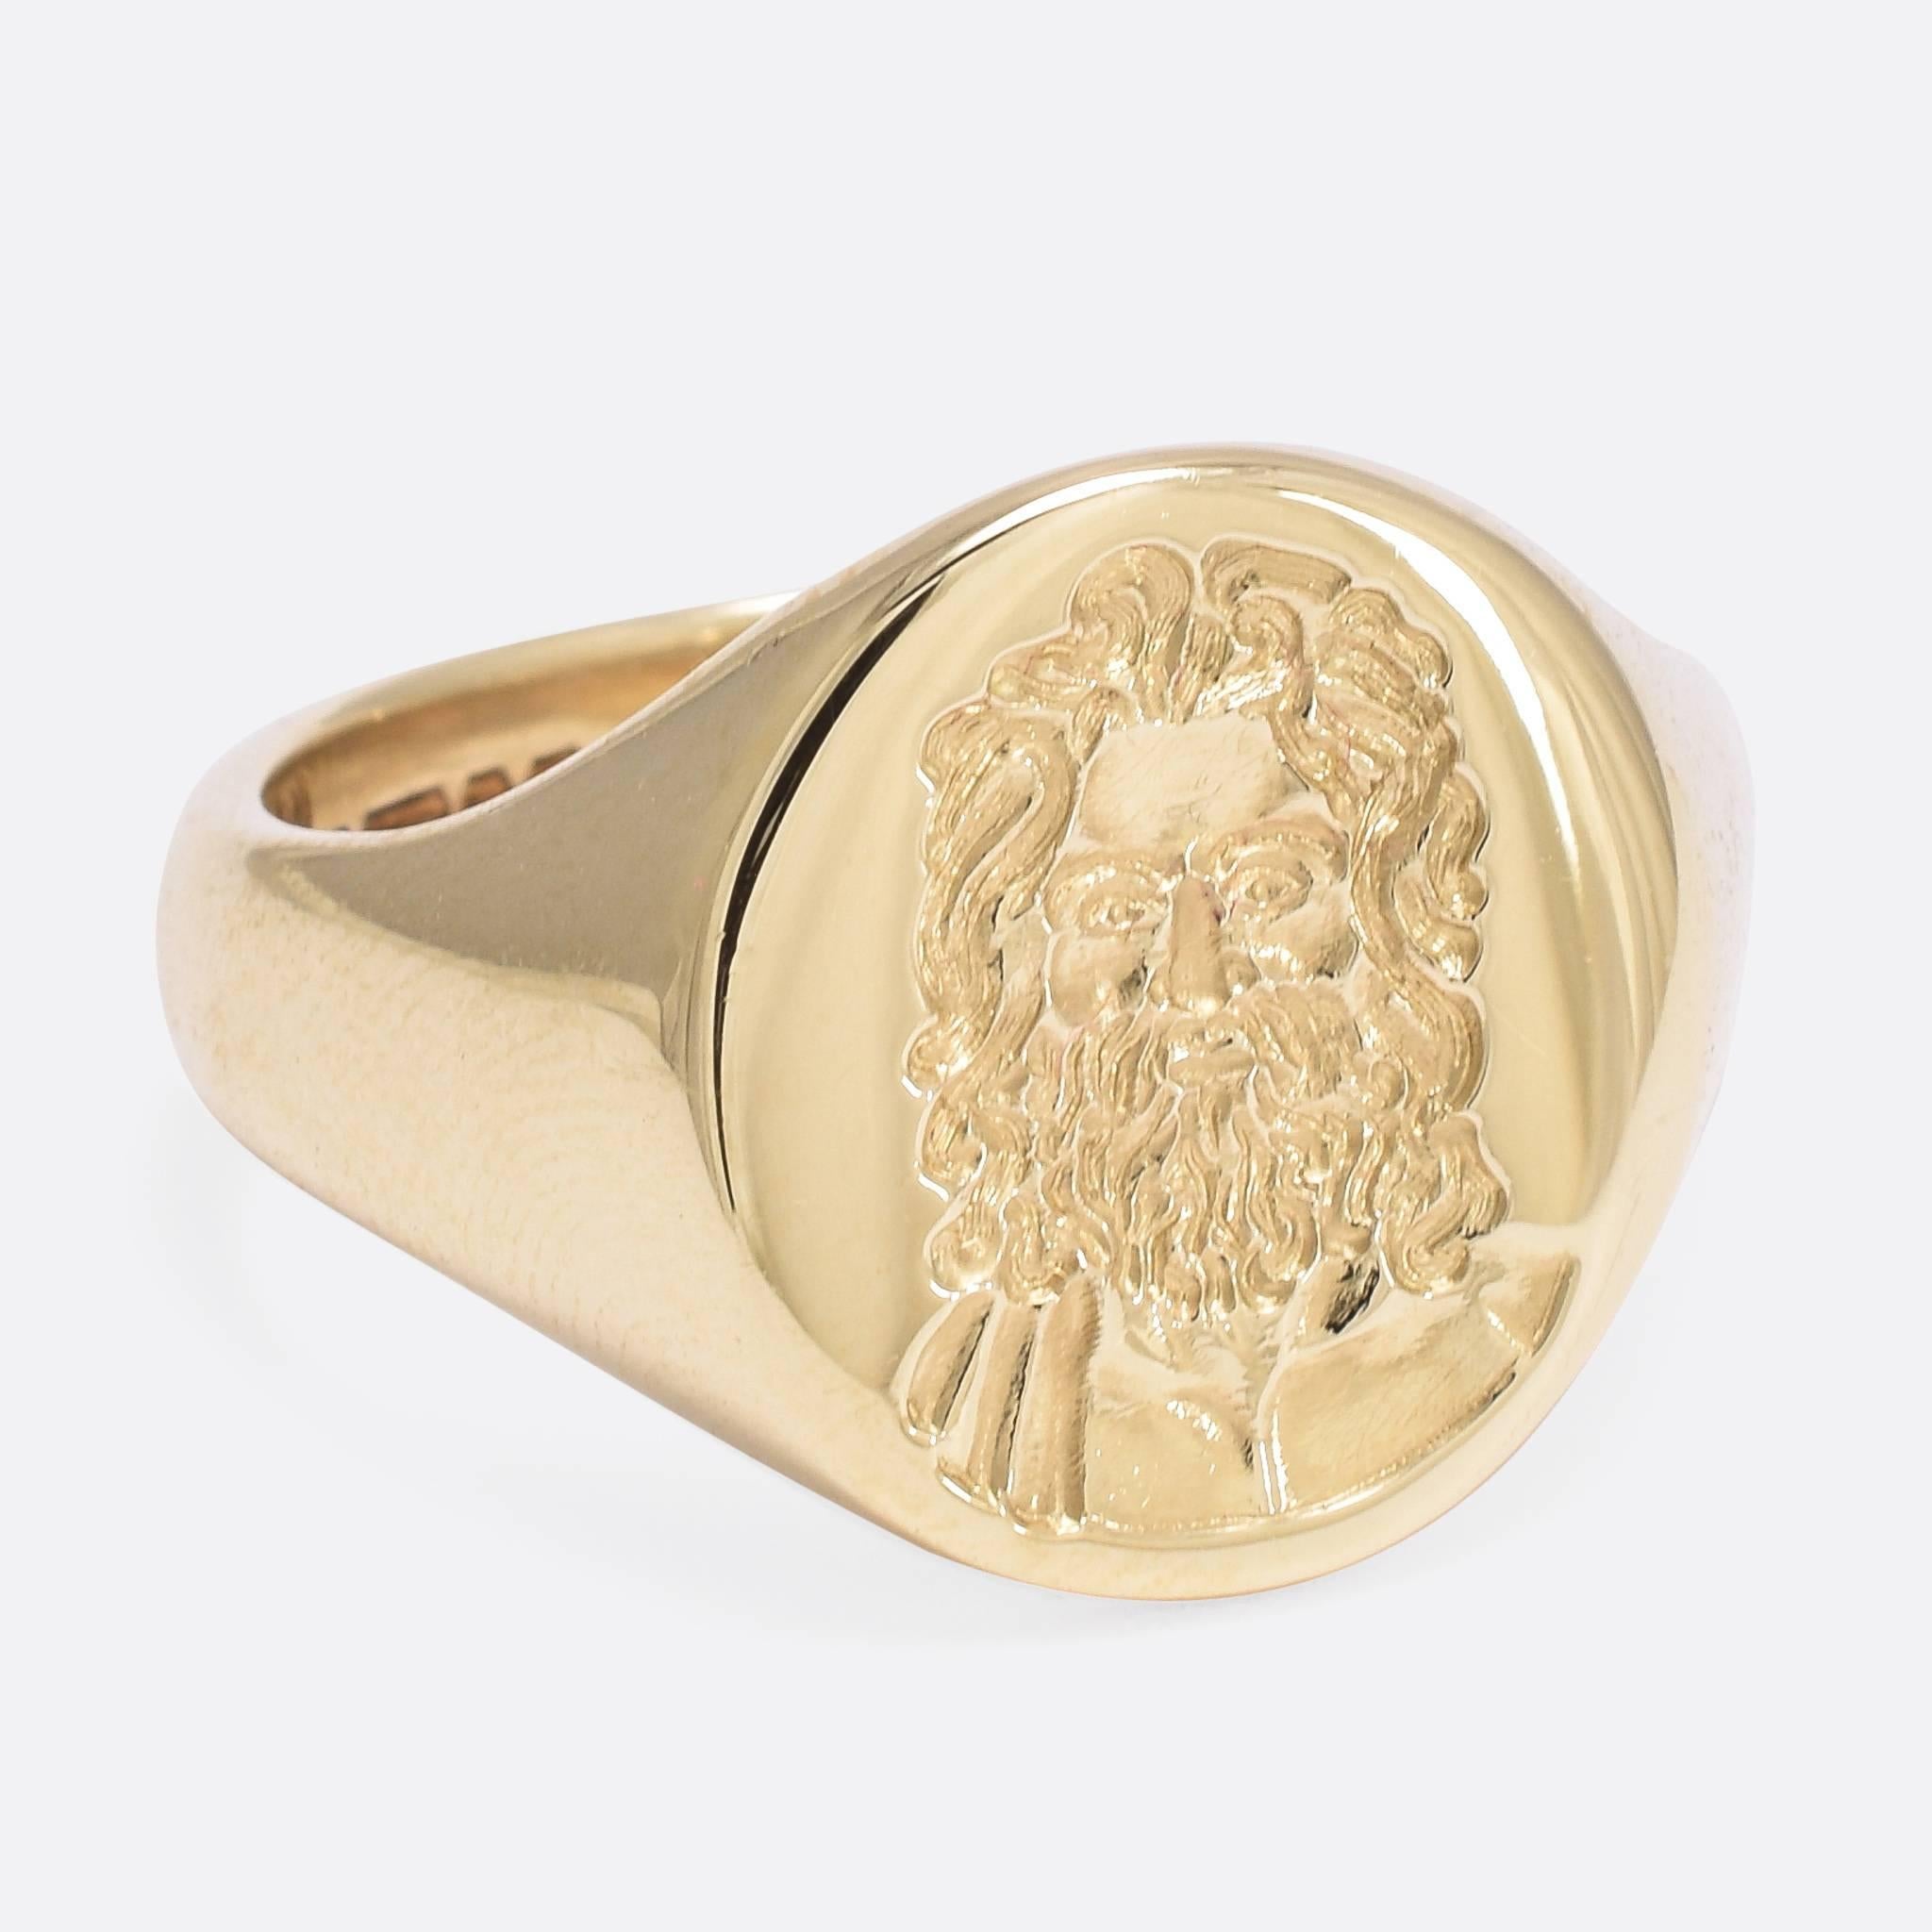 This wonderful oversized signet ring features an intaglio carving of Zeus, King of the Gods in Ancient Greek Mythology. The hand-carved portrait is of impeccable quality. Modelled in 9ct gold, the ring bears hallmarks for the year 1955 and the